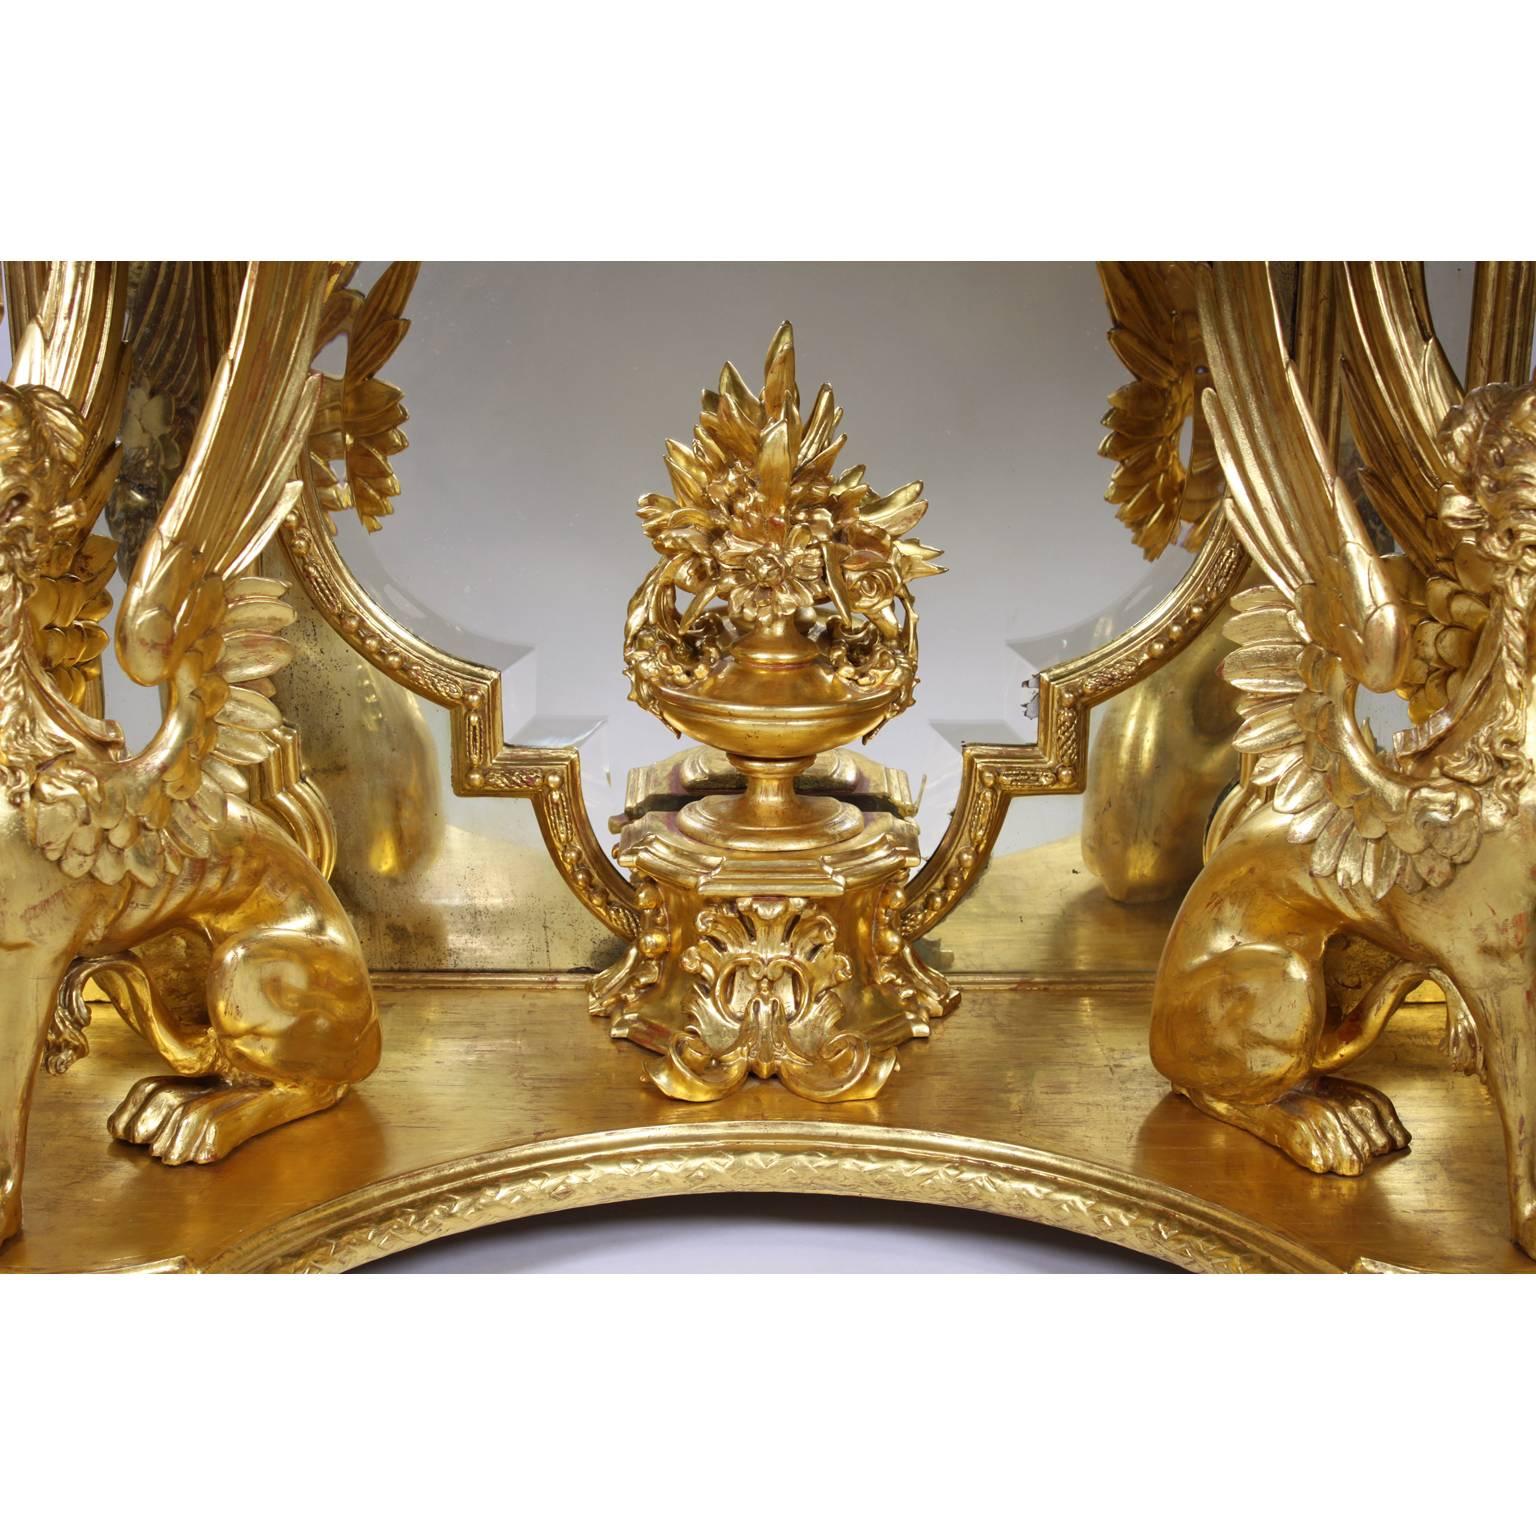 French Empire Revival 19th Century Giltwood Carved Figural Console and Mirror For Sale 5